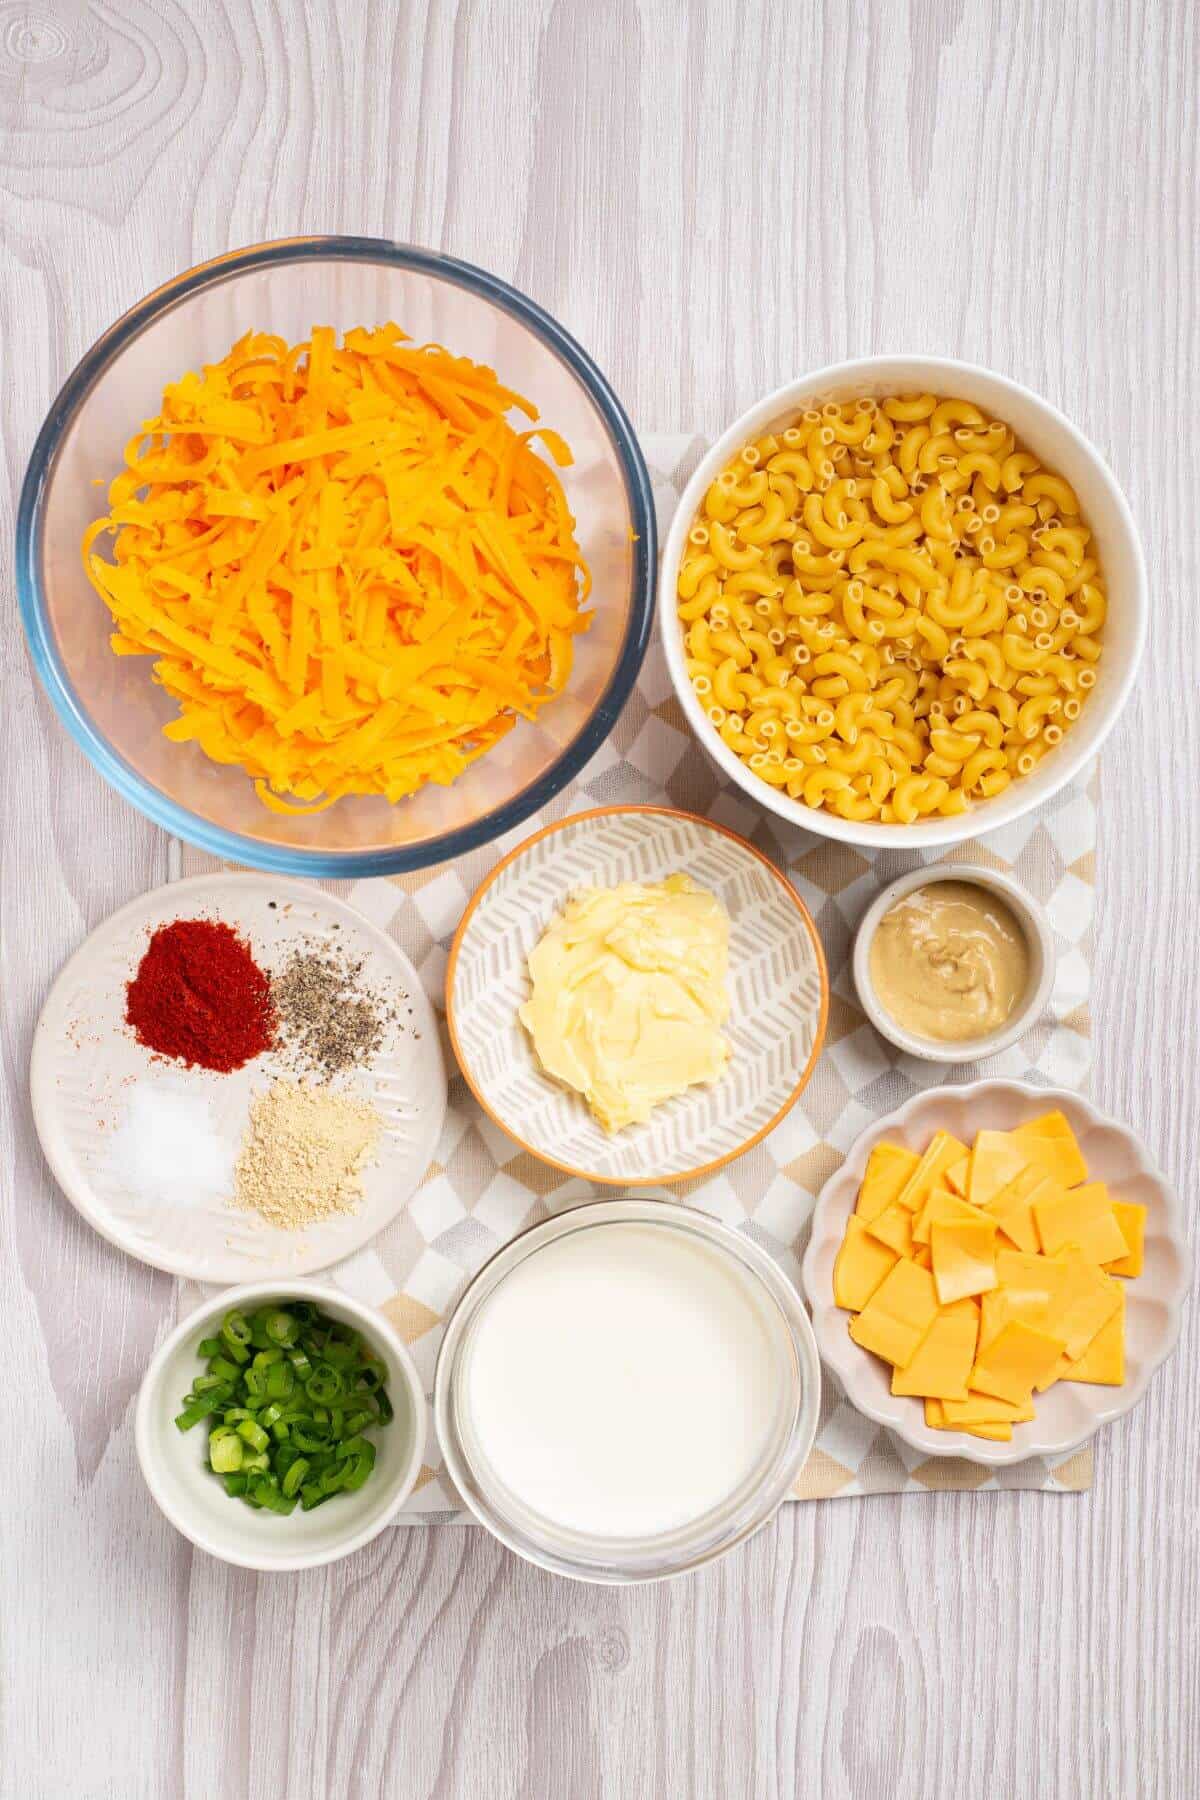 The ingredients for a macaroni and cheese recipe.